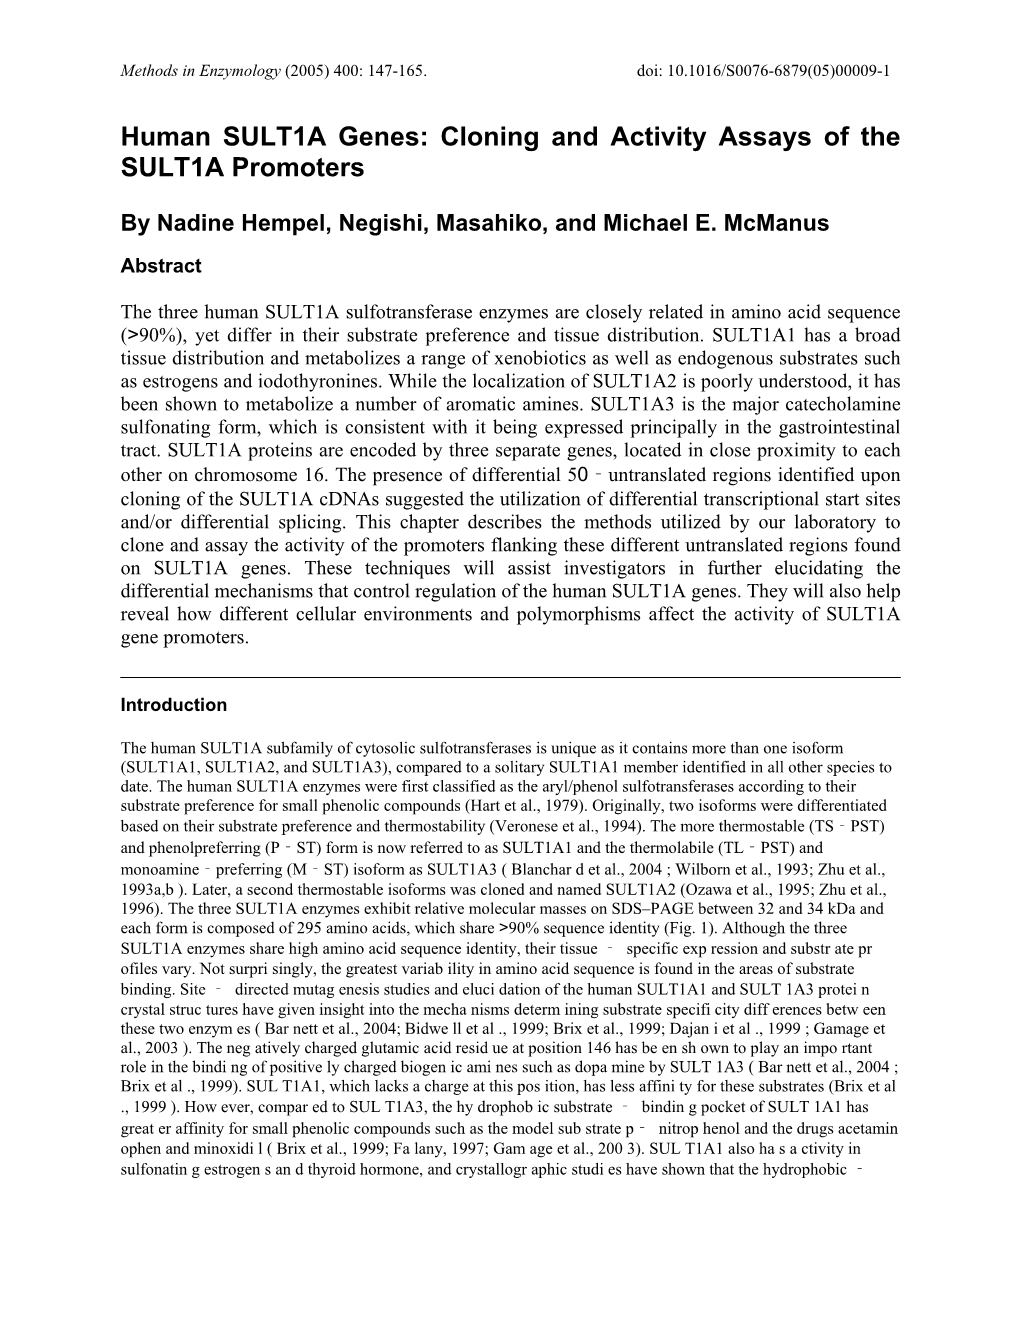 Cloning and Activity Assays of the SULT1A Promoters